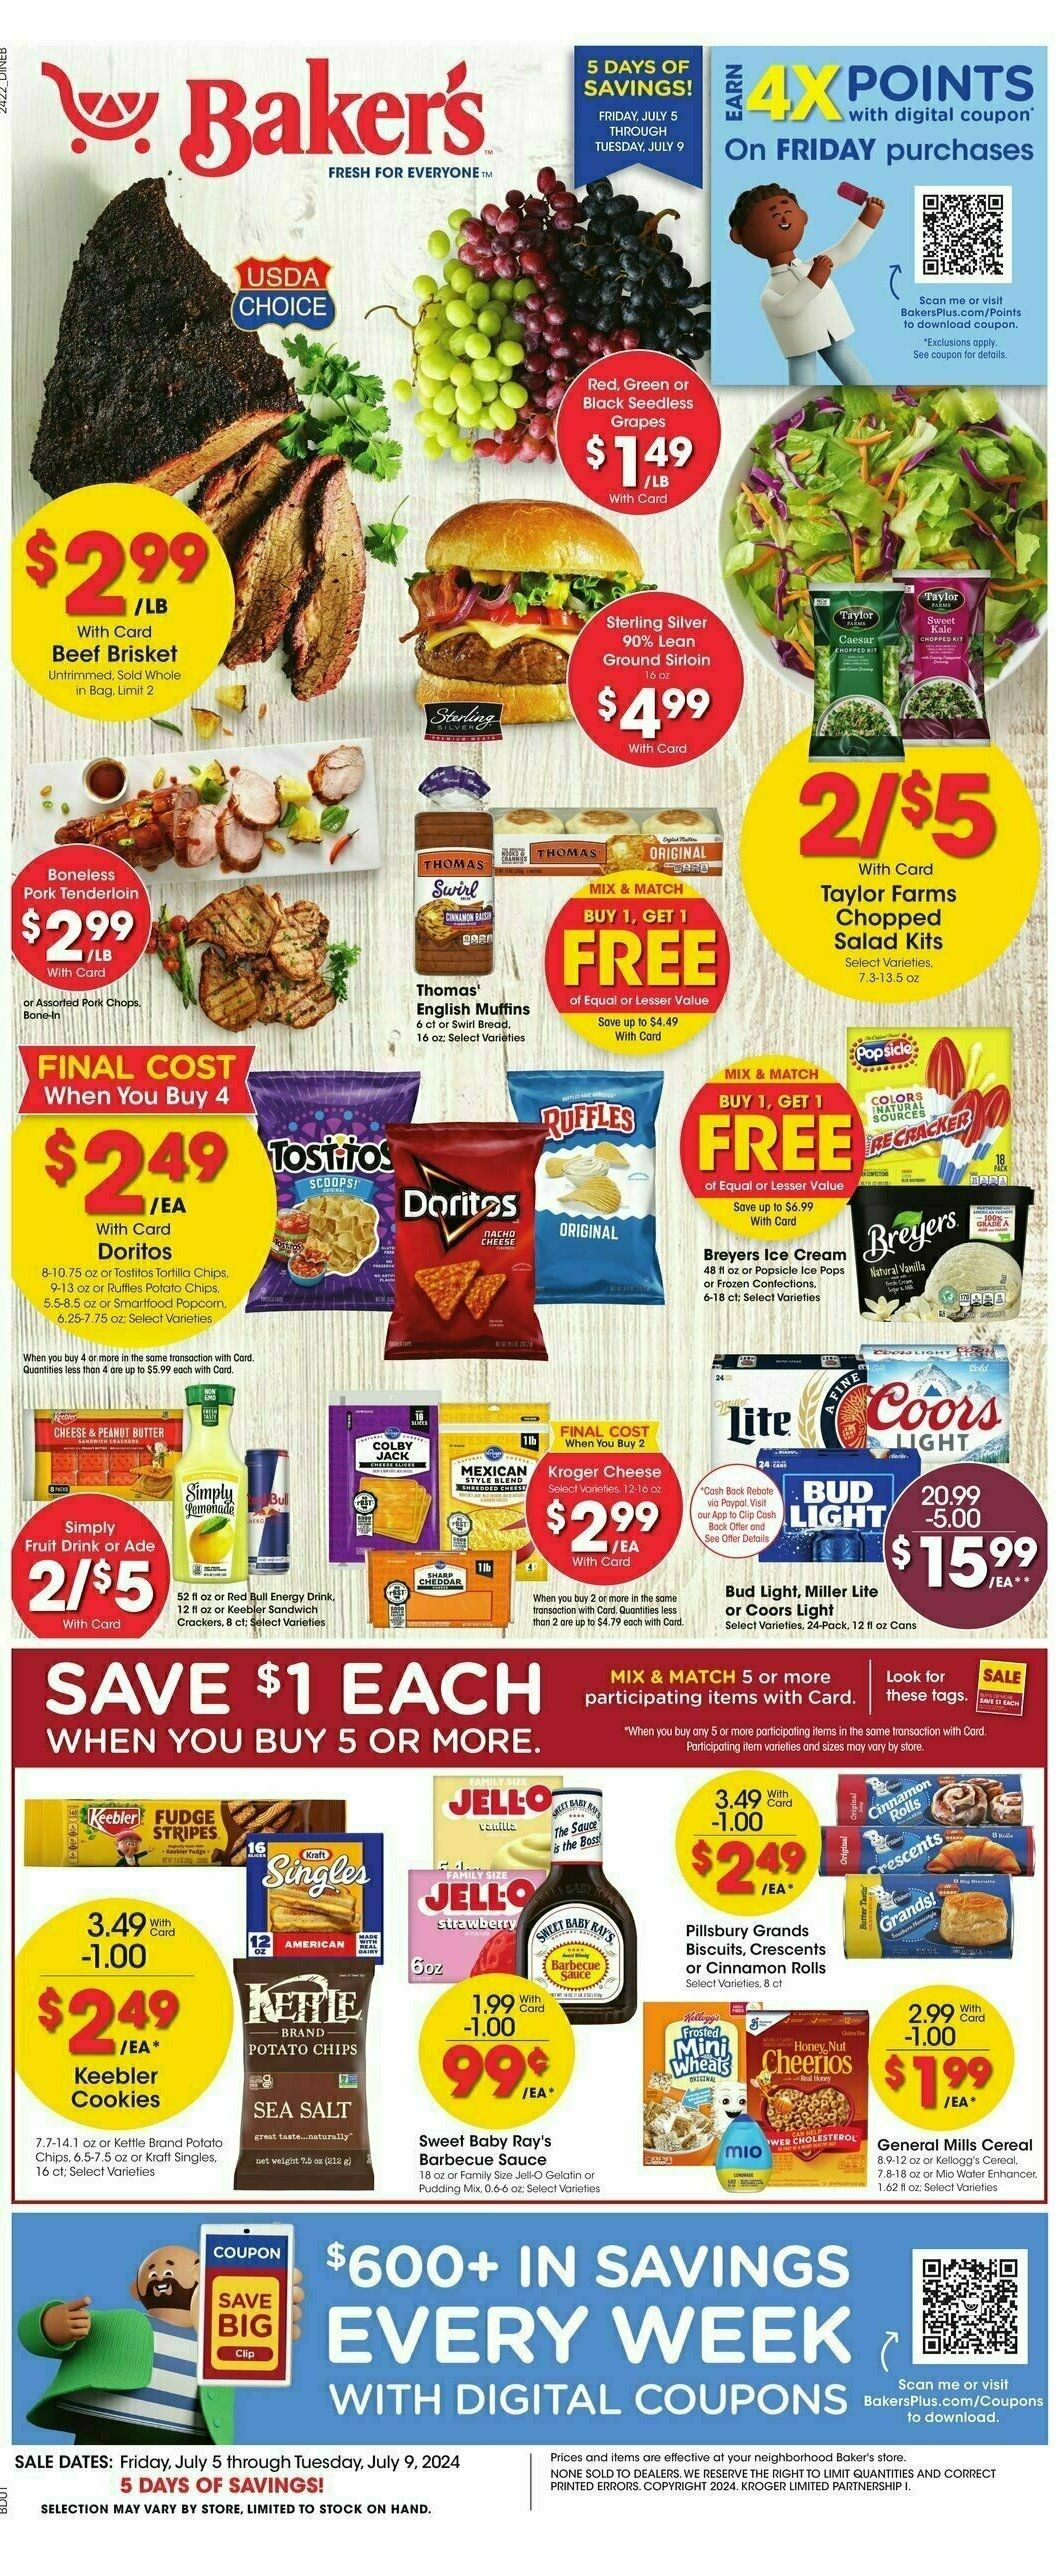 Baker's Weekly Ad from July 5